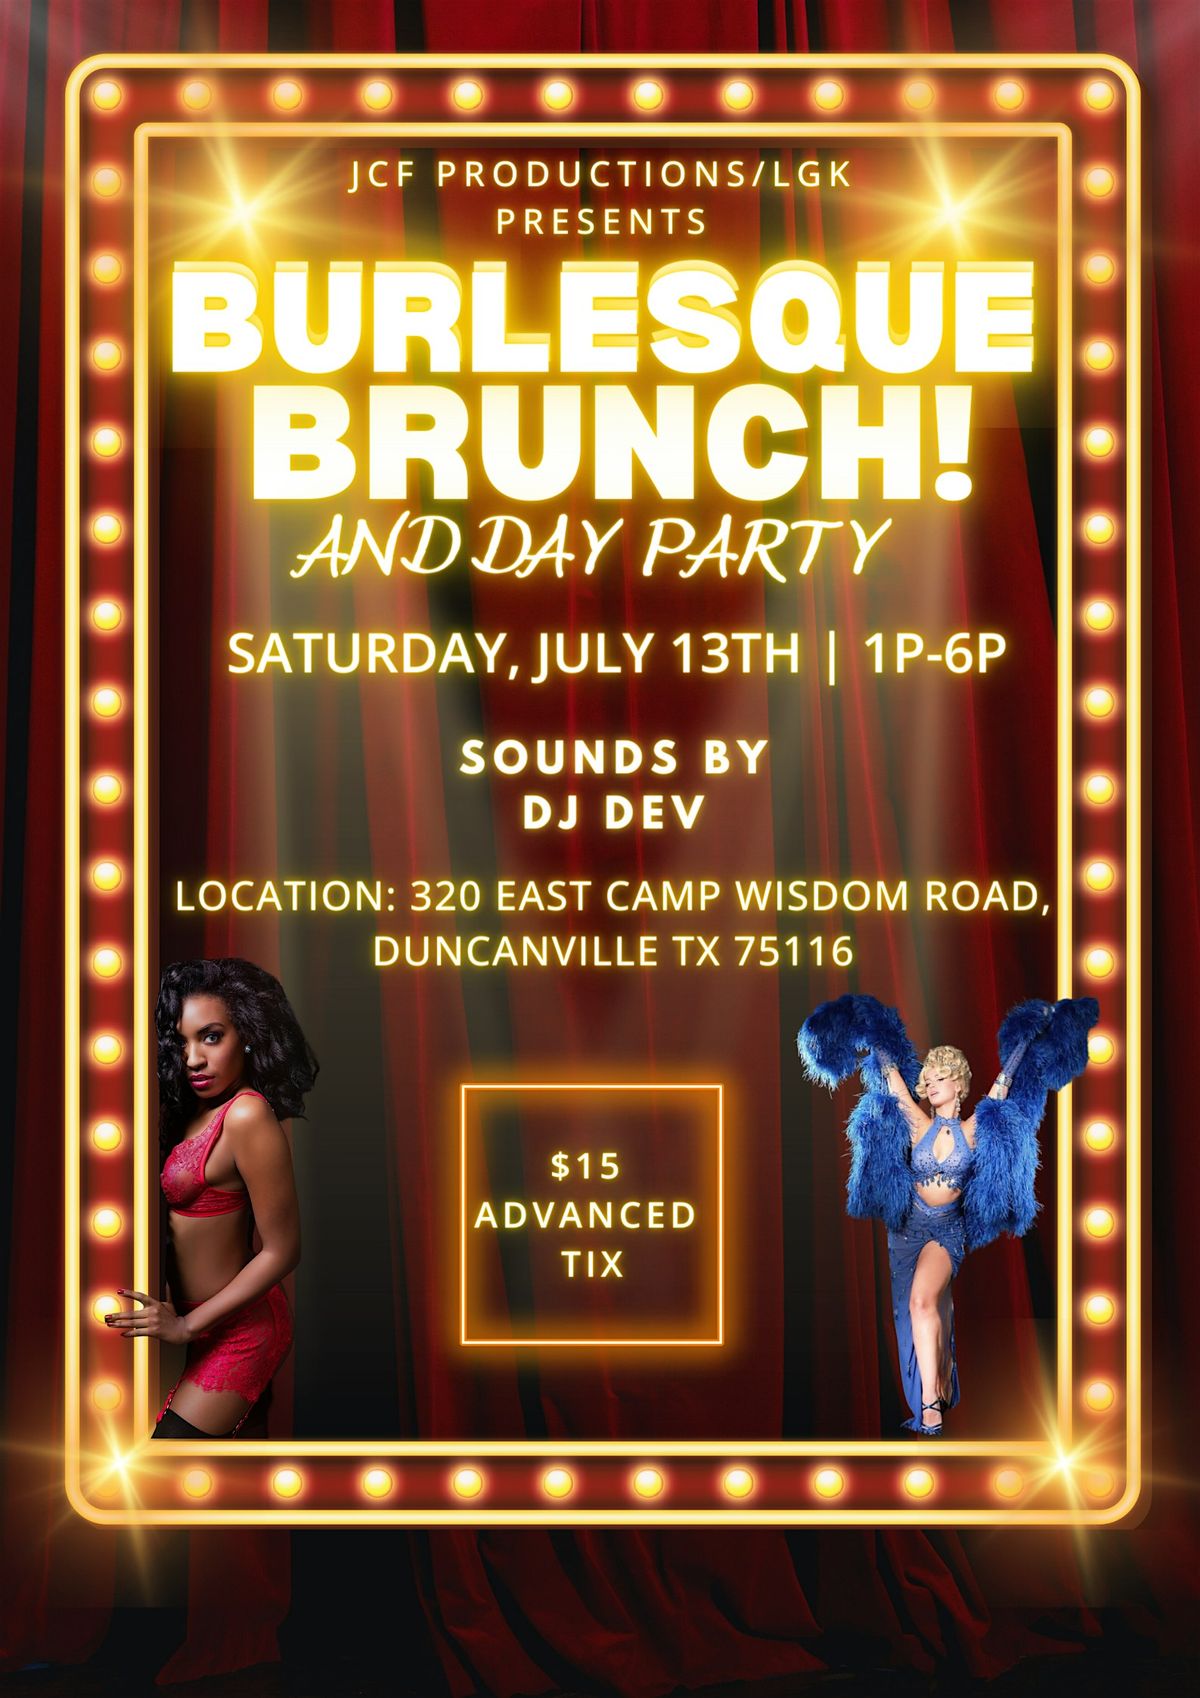 Burlesque Brunch and Day Party